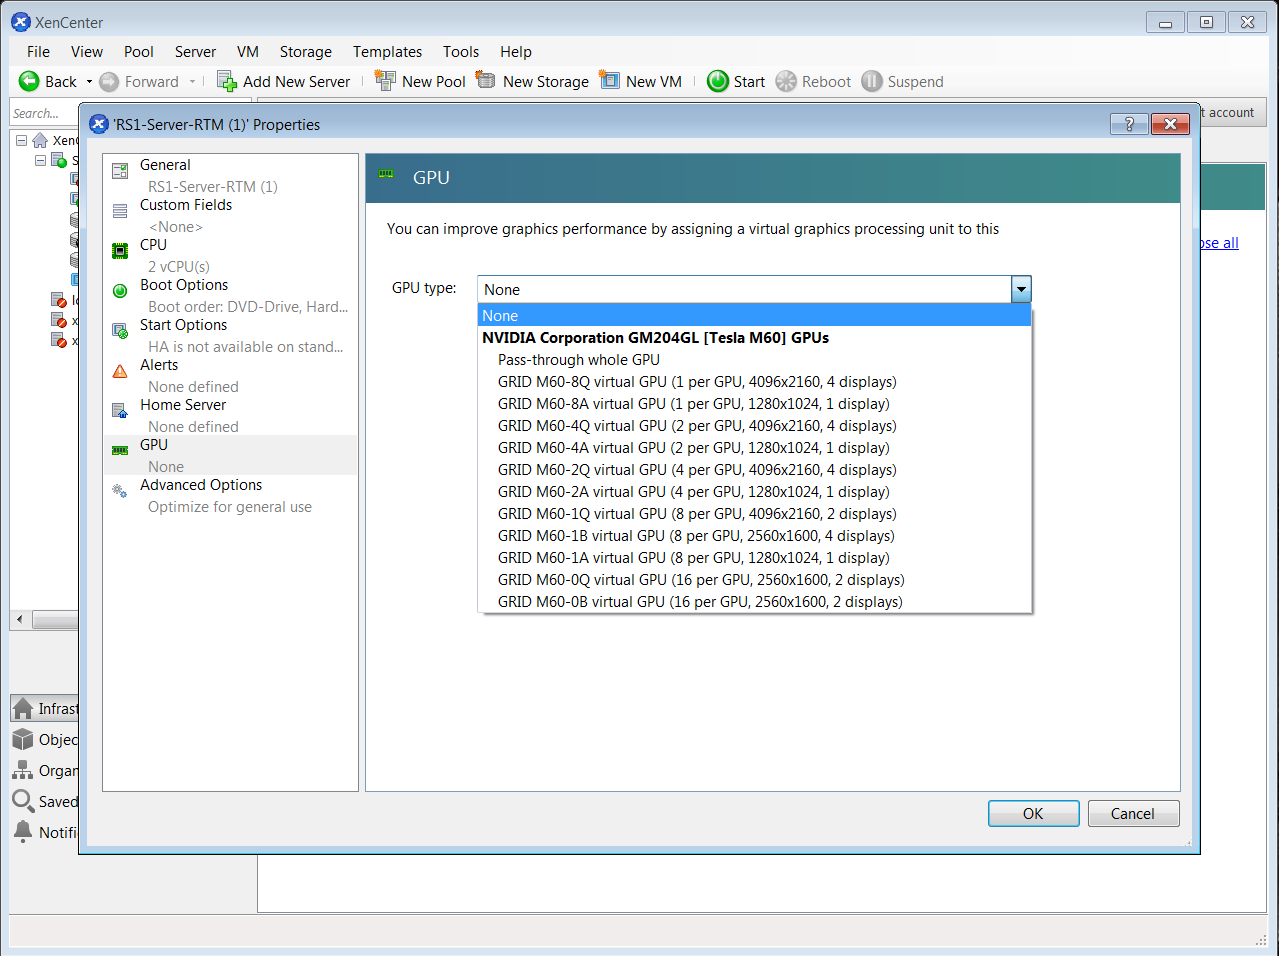 Screen capture showing the use of XenCenter to remove a vGPU configuration from a VM